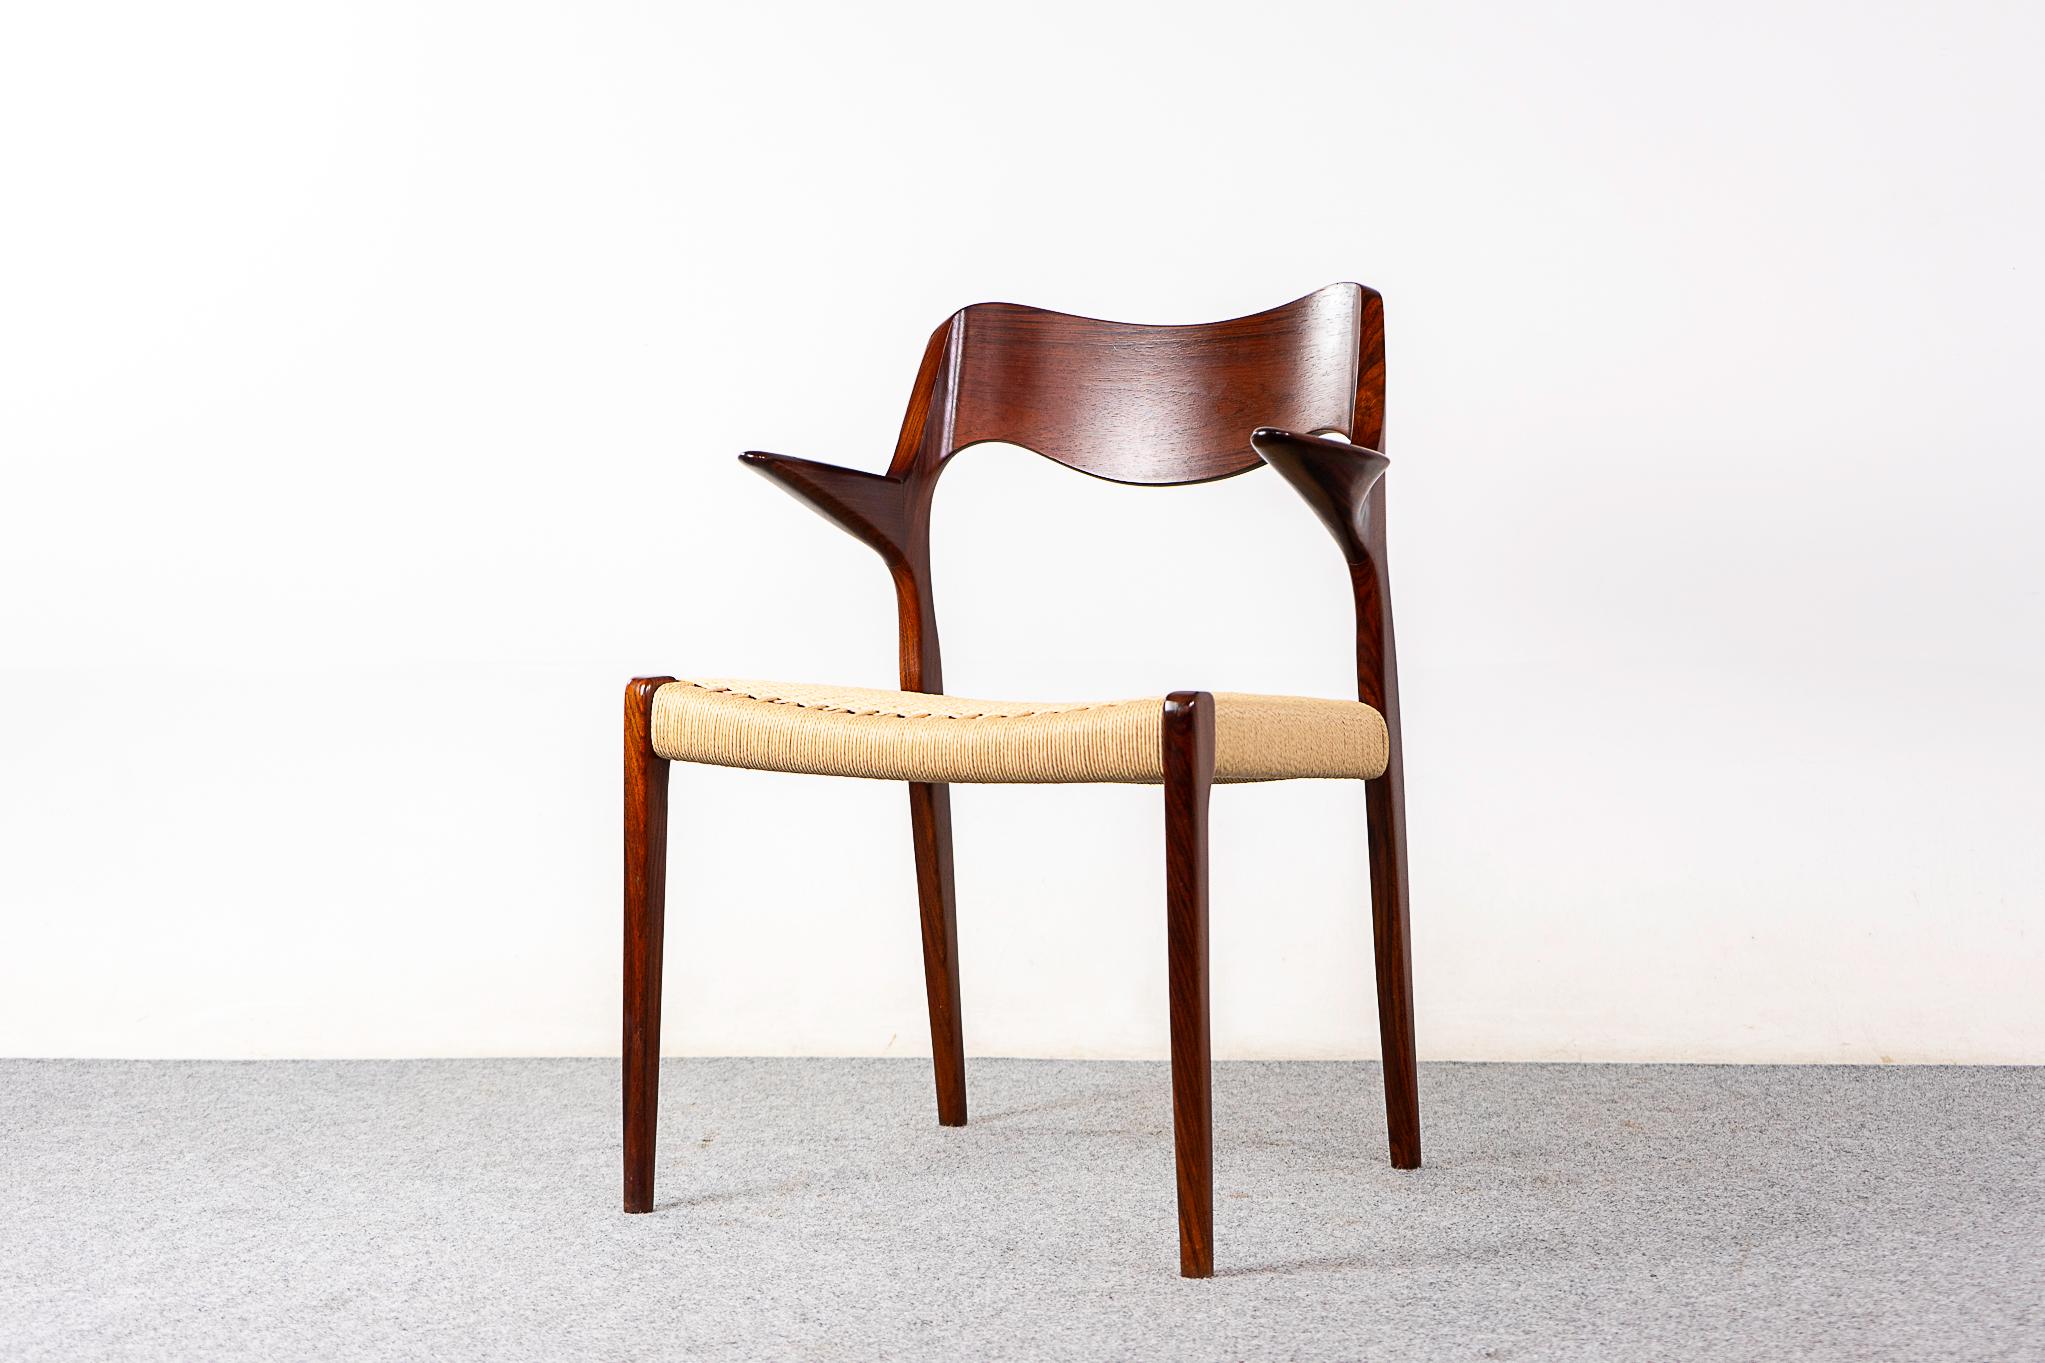 Rosewood model 55 armchair by Niels Otto Moller for J L Moller Mobelfabrik, circa 1950's. Iconic frame with graceful lines, sculptural floating armrests and a new meticulously woven paper cord seat. JL Moller maker's mark intact. 

Please inquire